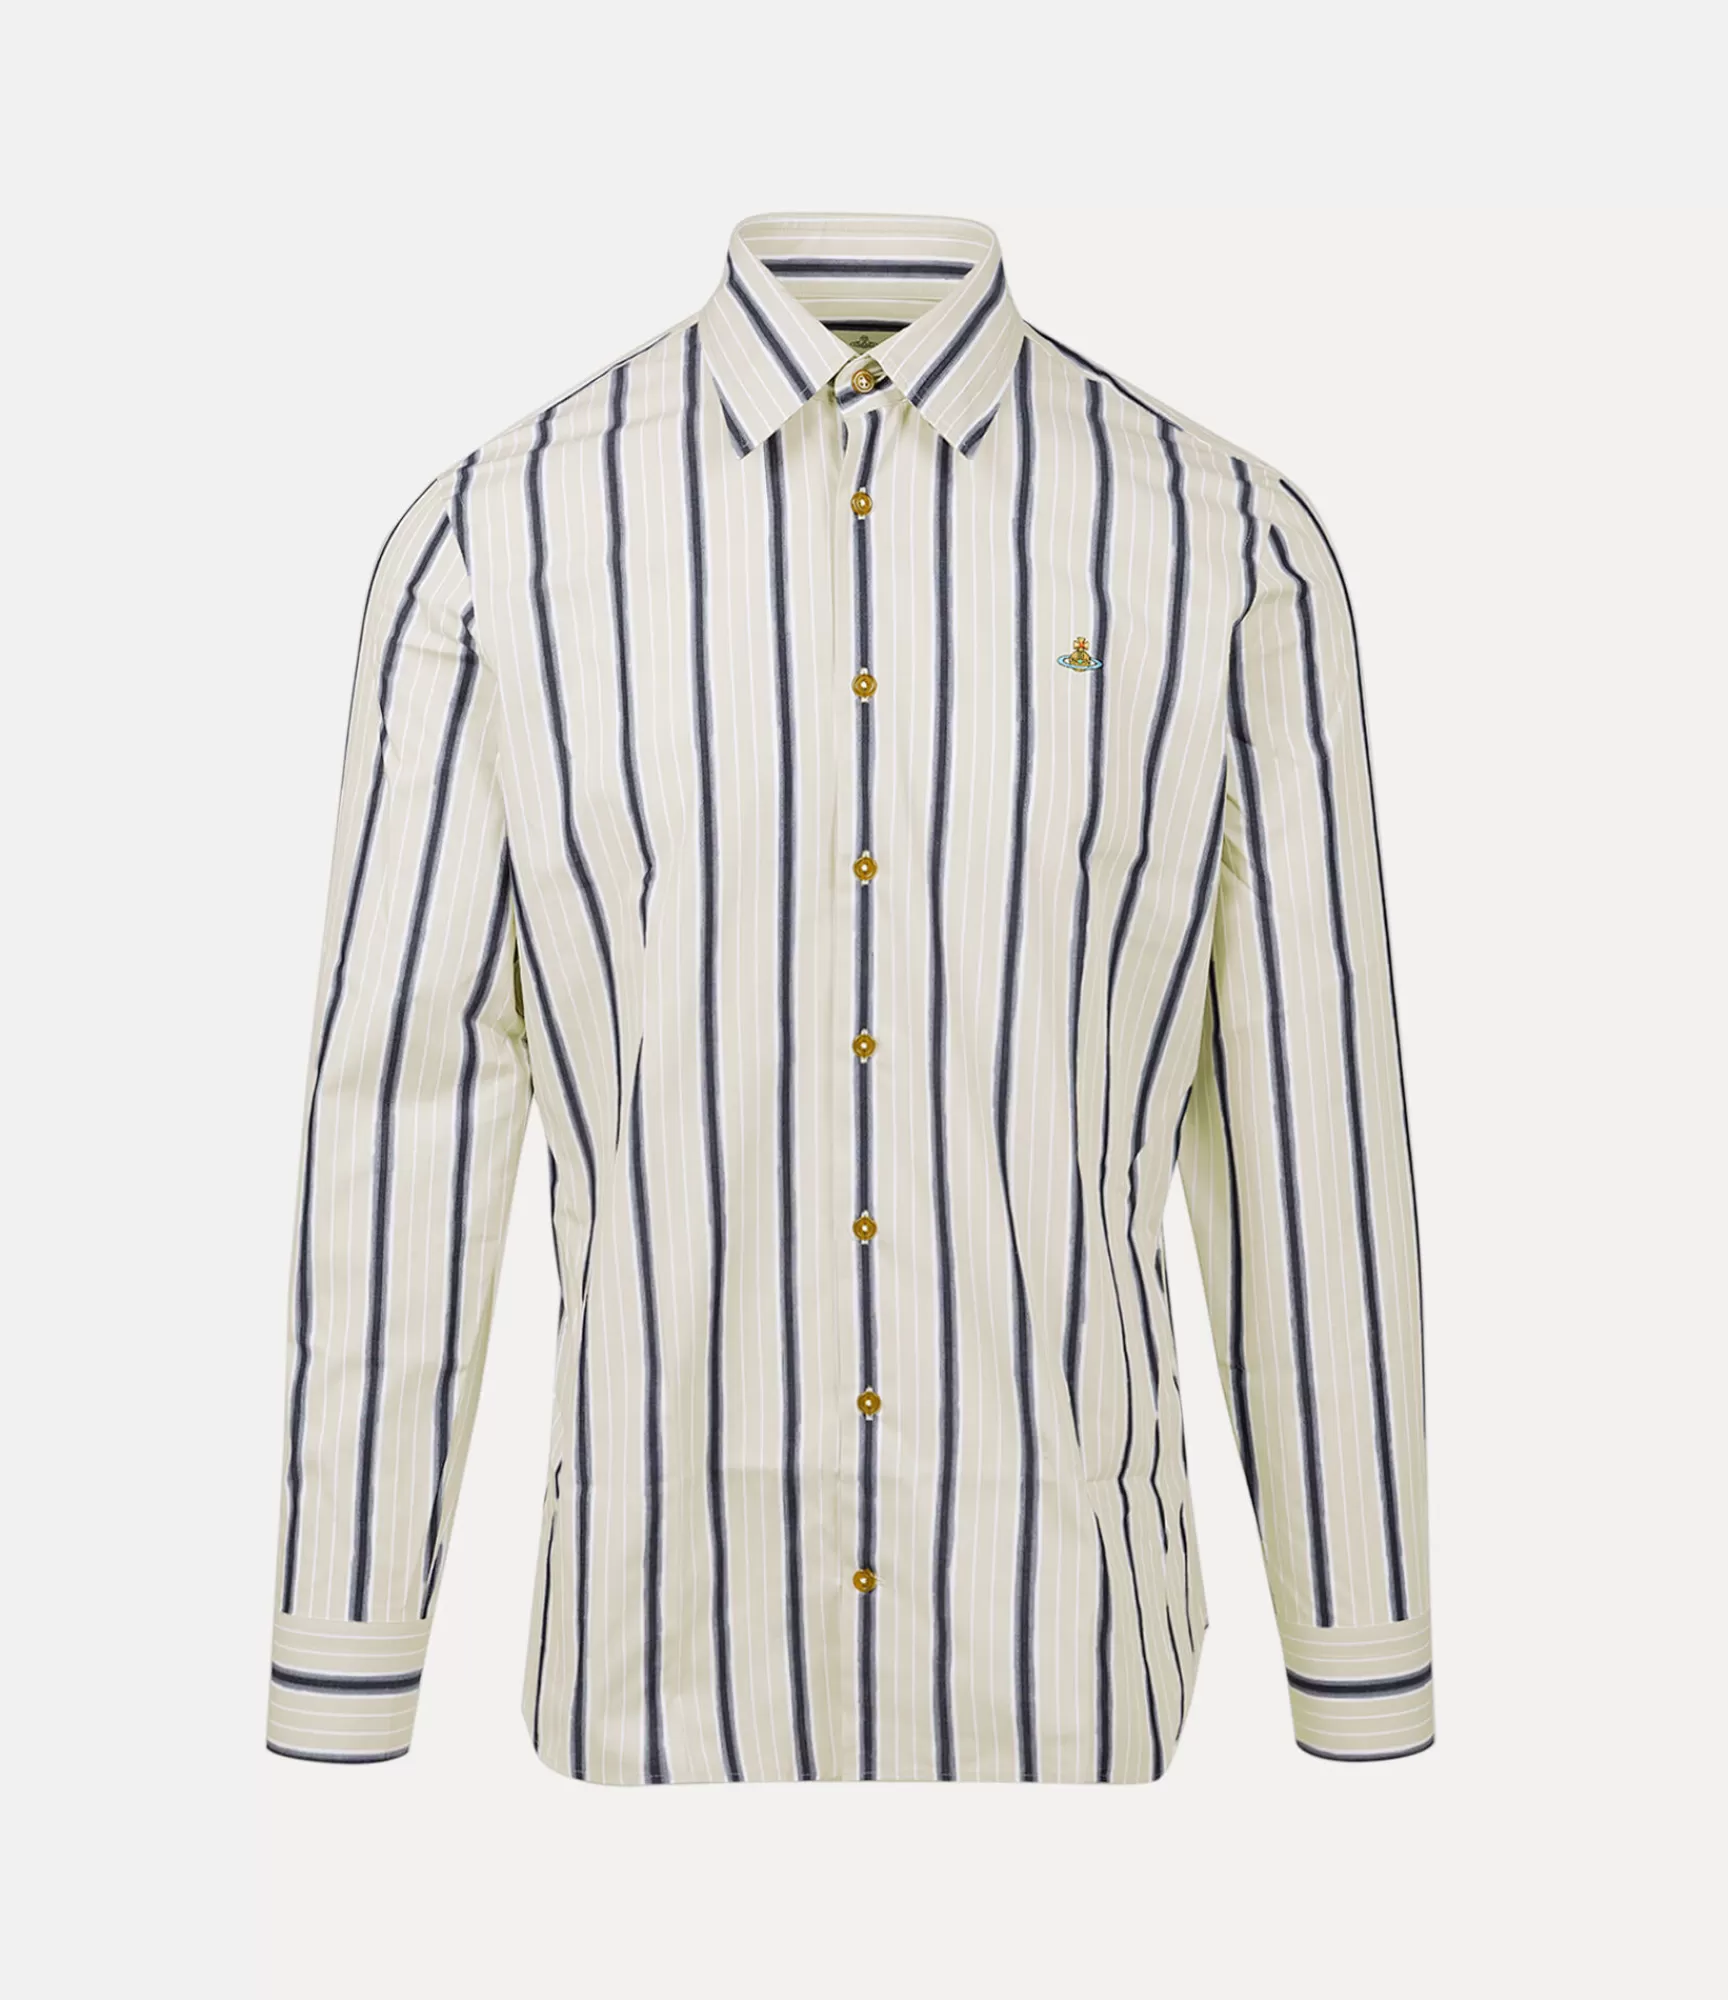 Vivienne Westwood Shirts | Tops and Shirts*Ghost shirt Sage Green